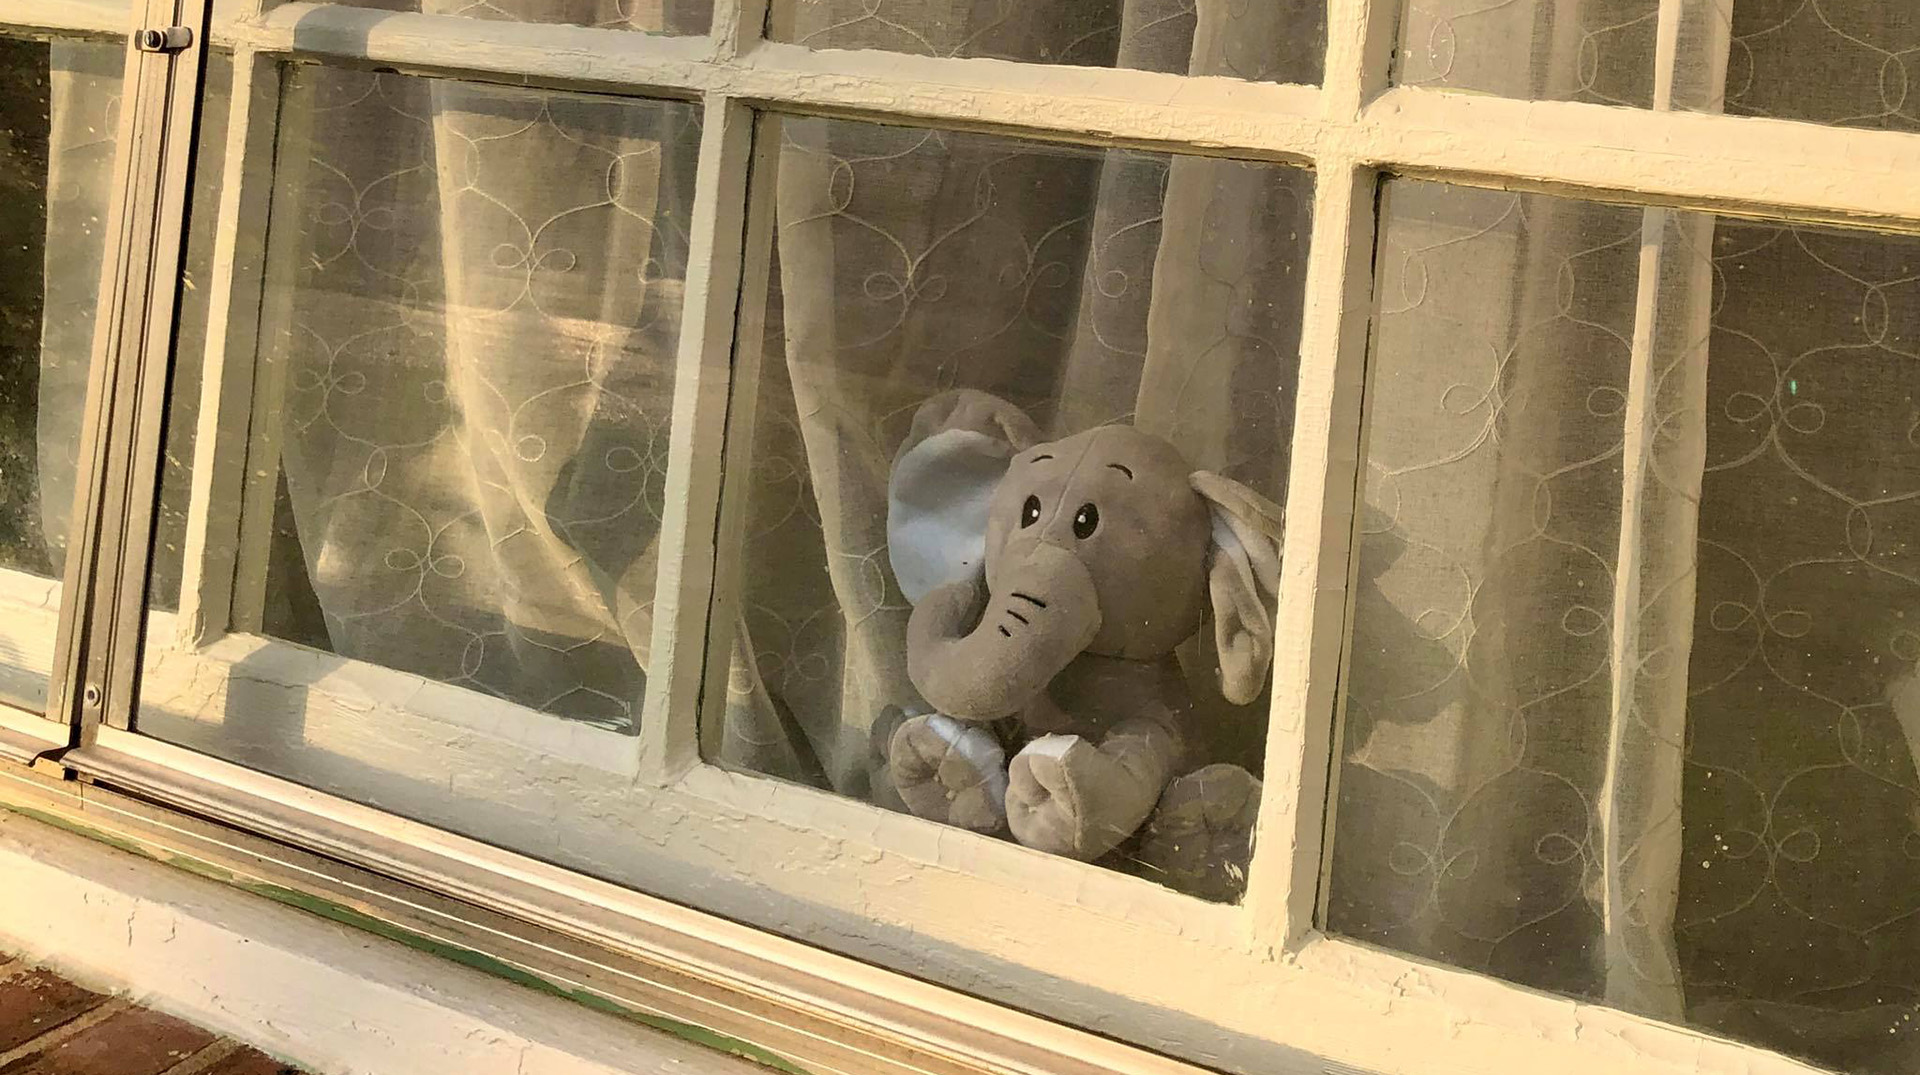 An elephant toy sits in a window sill.